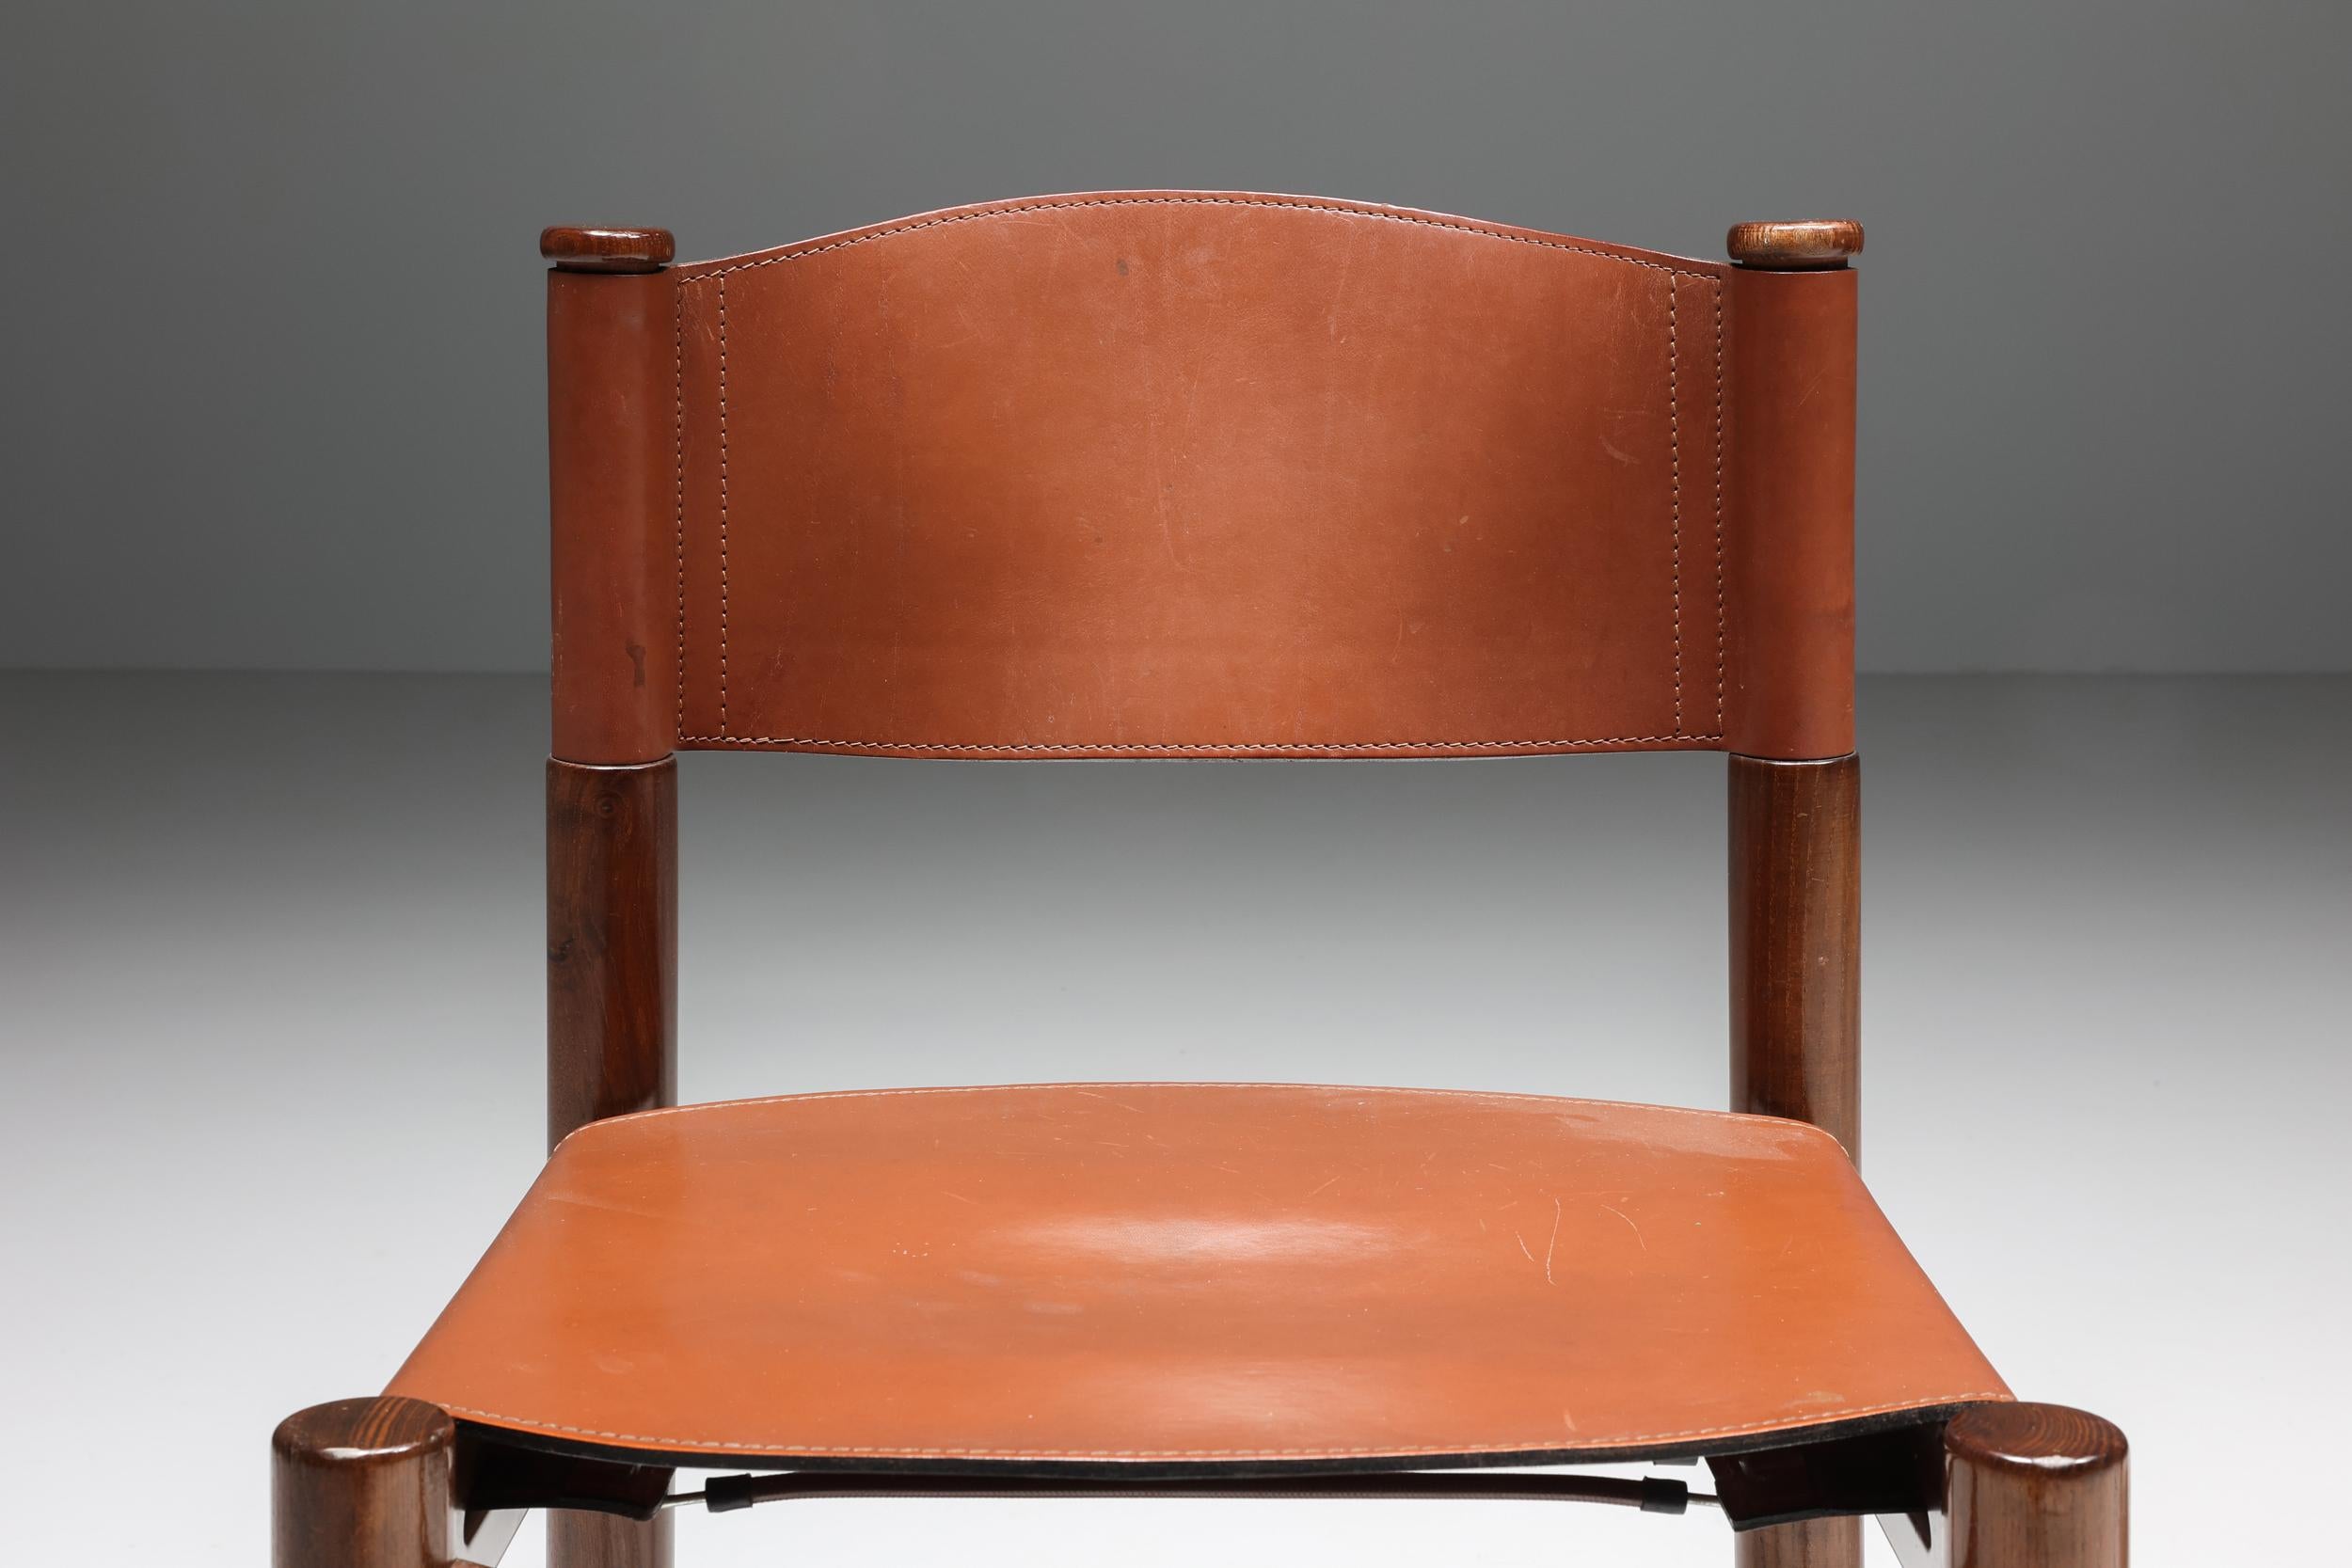 Scarpa Inspired Walnut & Leather Dining Chairs, Mid-Century Modern, Rustic 1950' 4